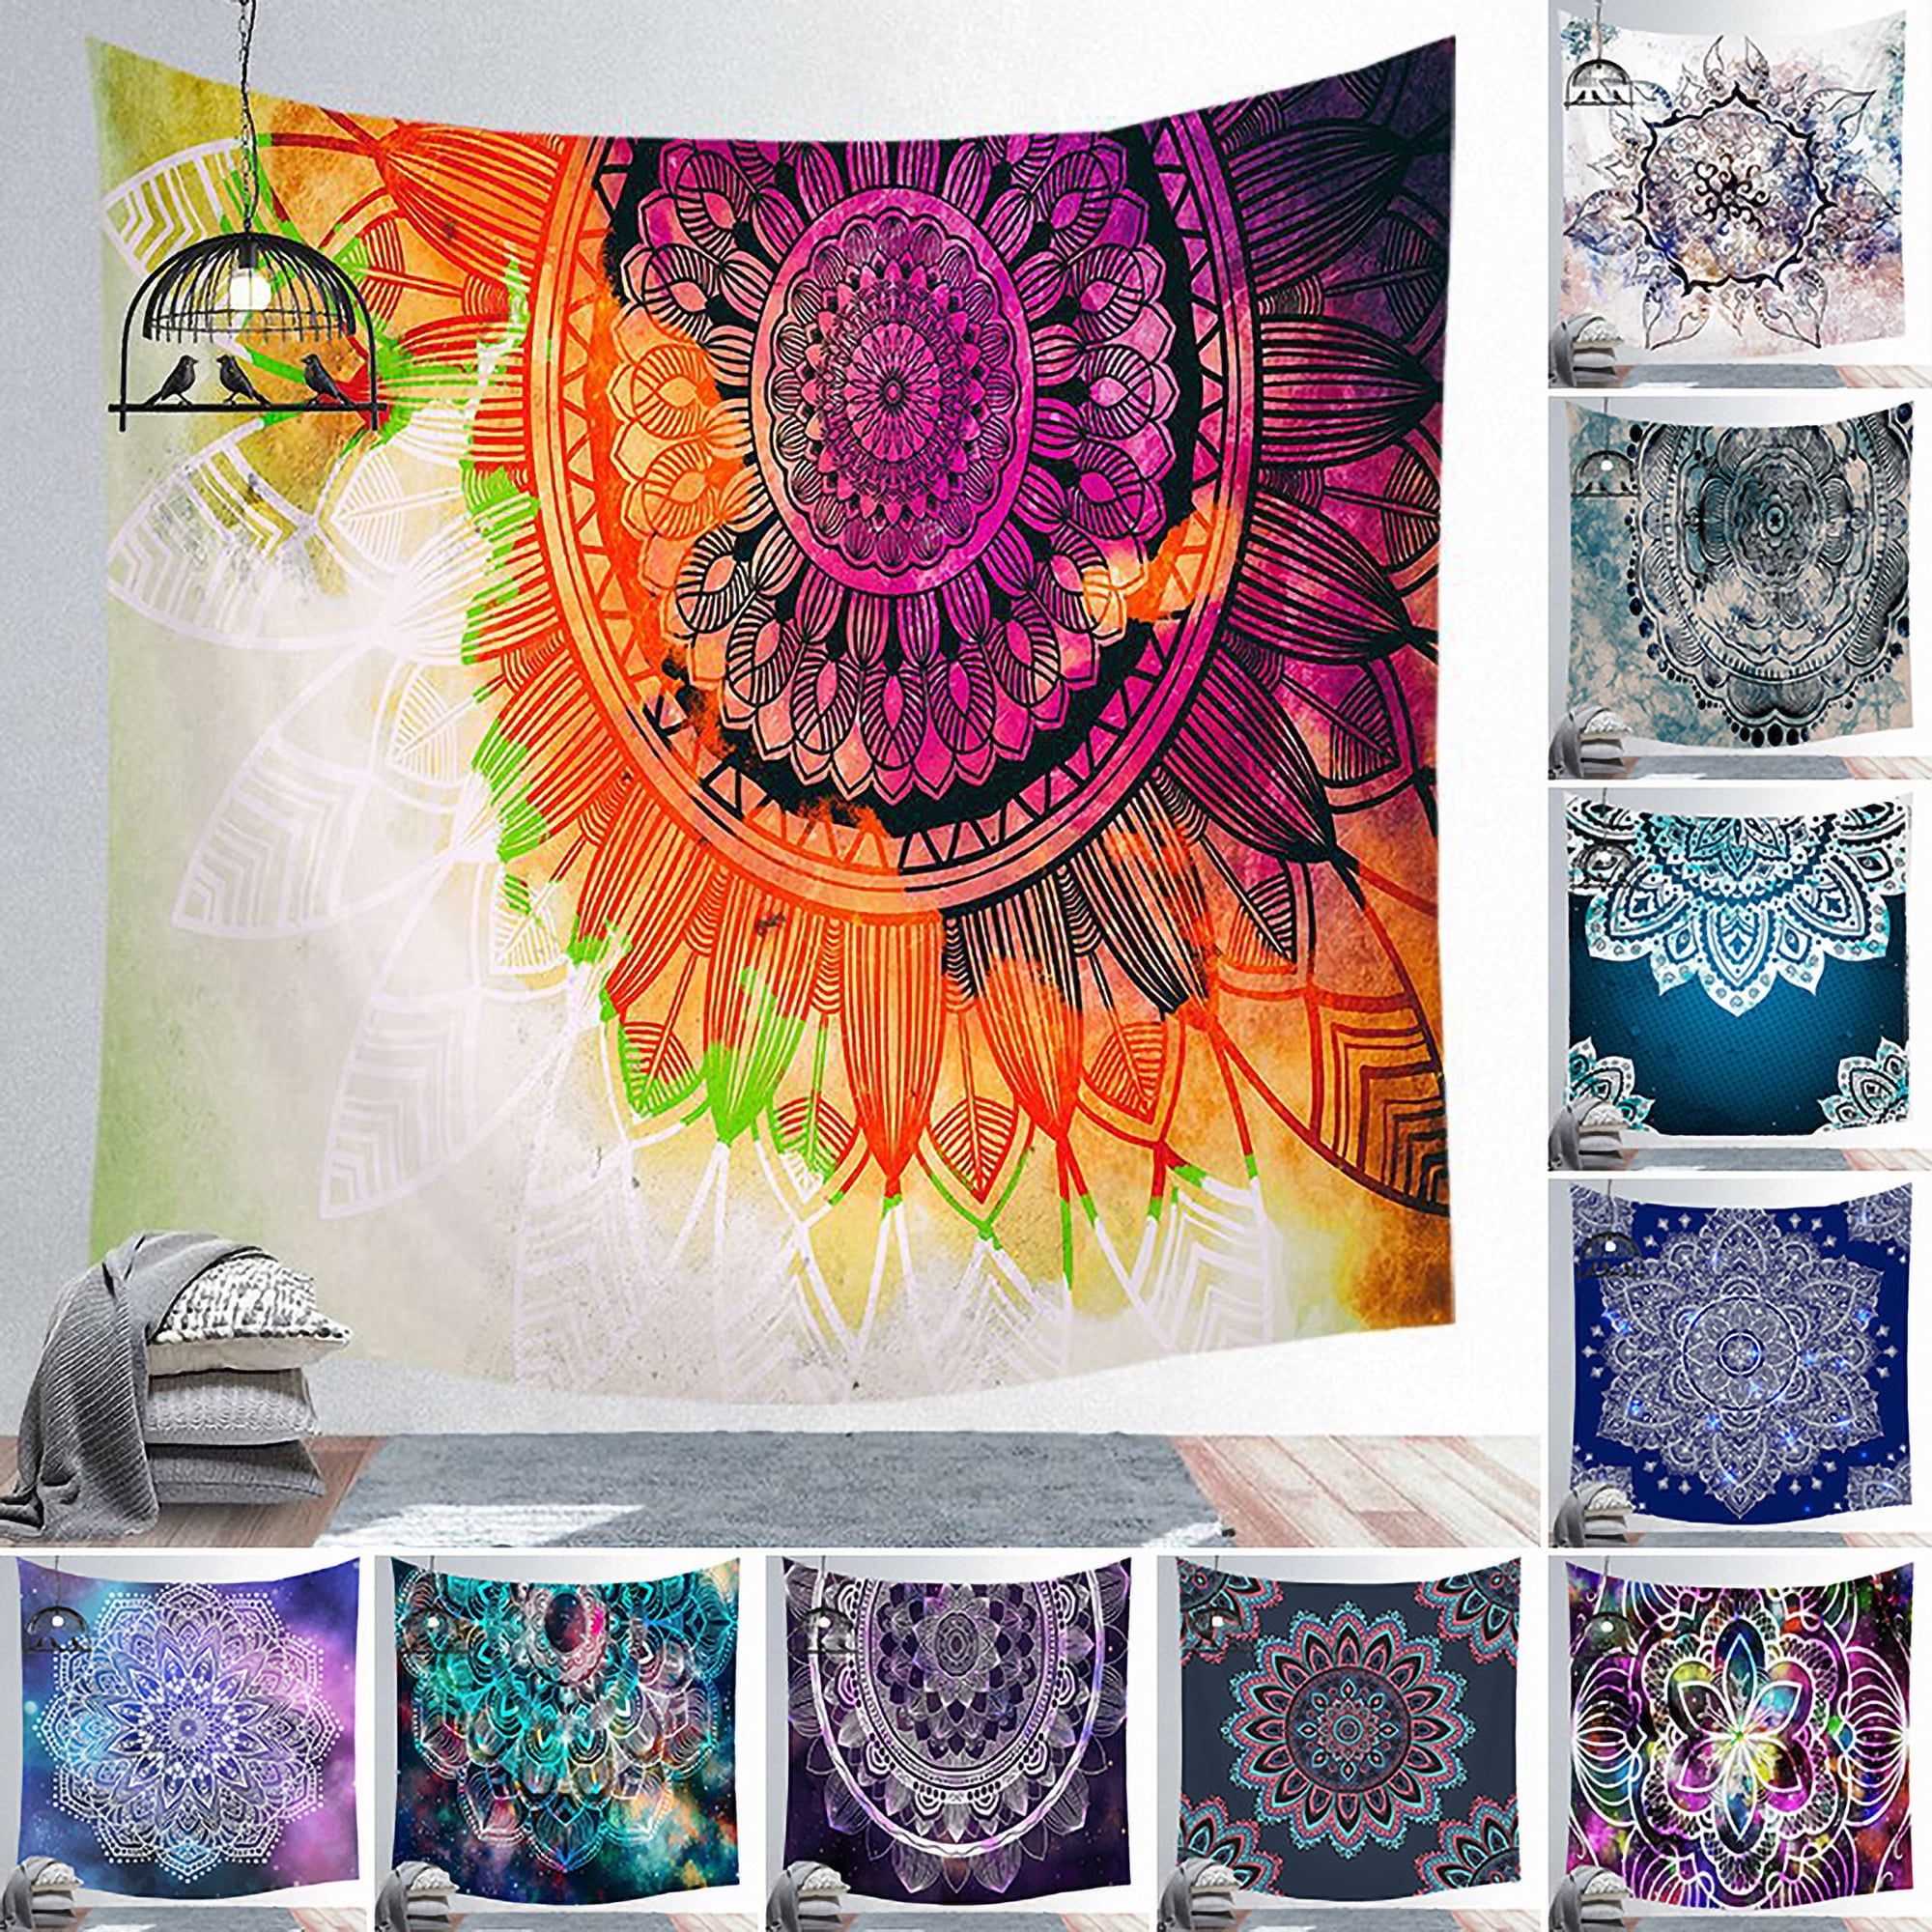 Details about   Mandala Indian Tapestry Psychedelic Wall Hanging Bohemian Blanket Home Art Decor 